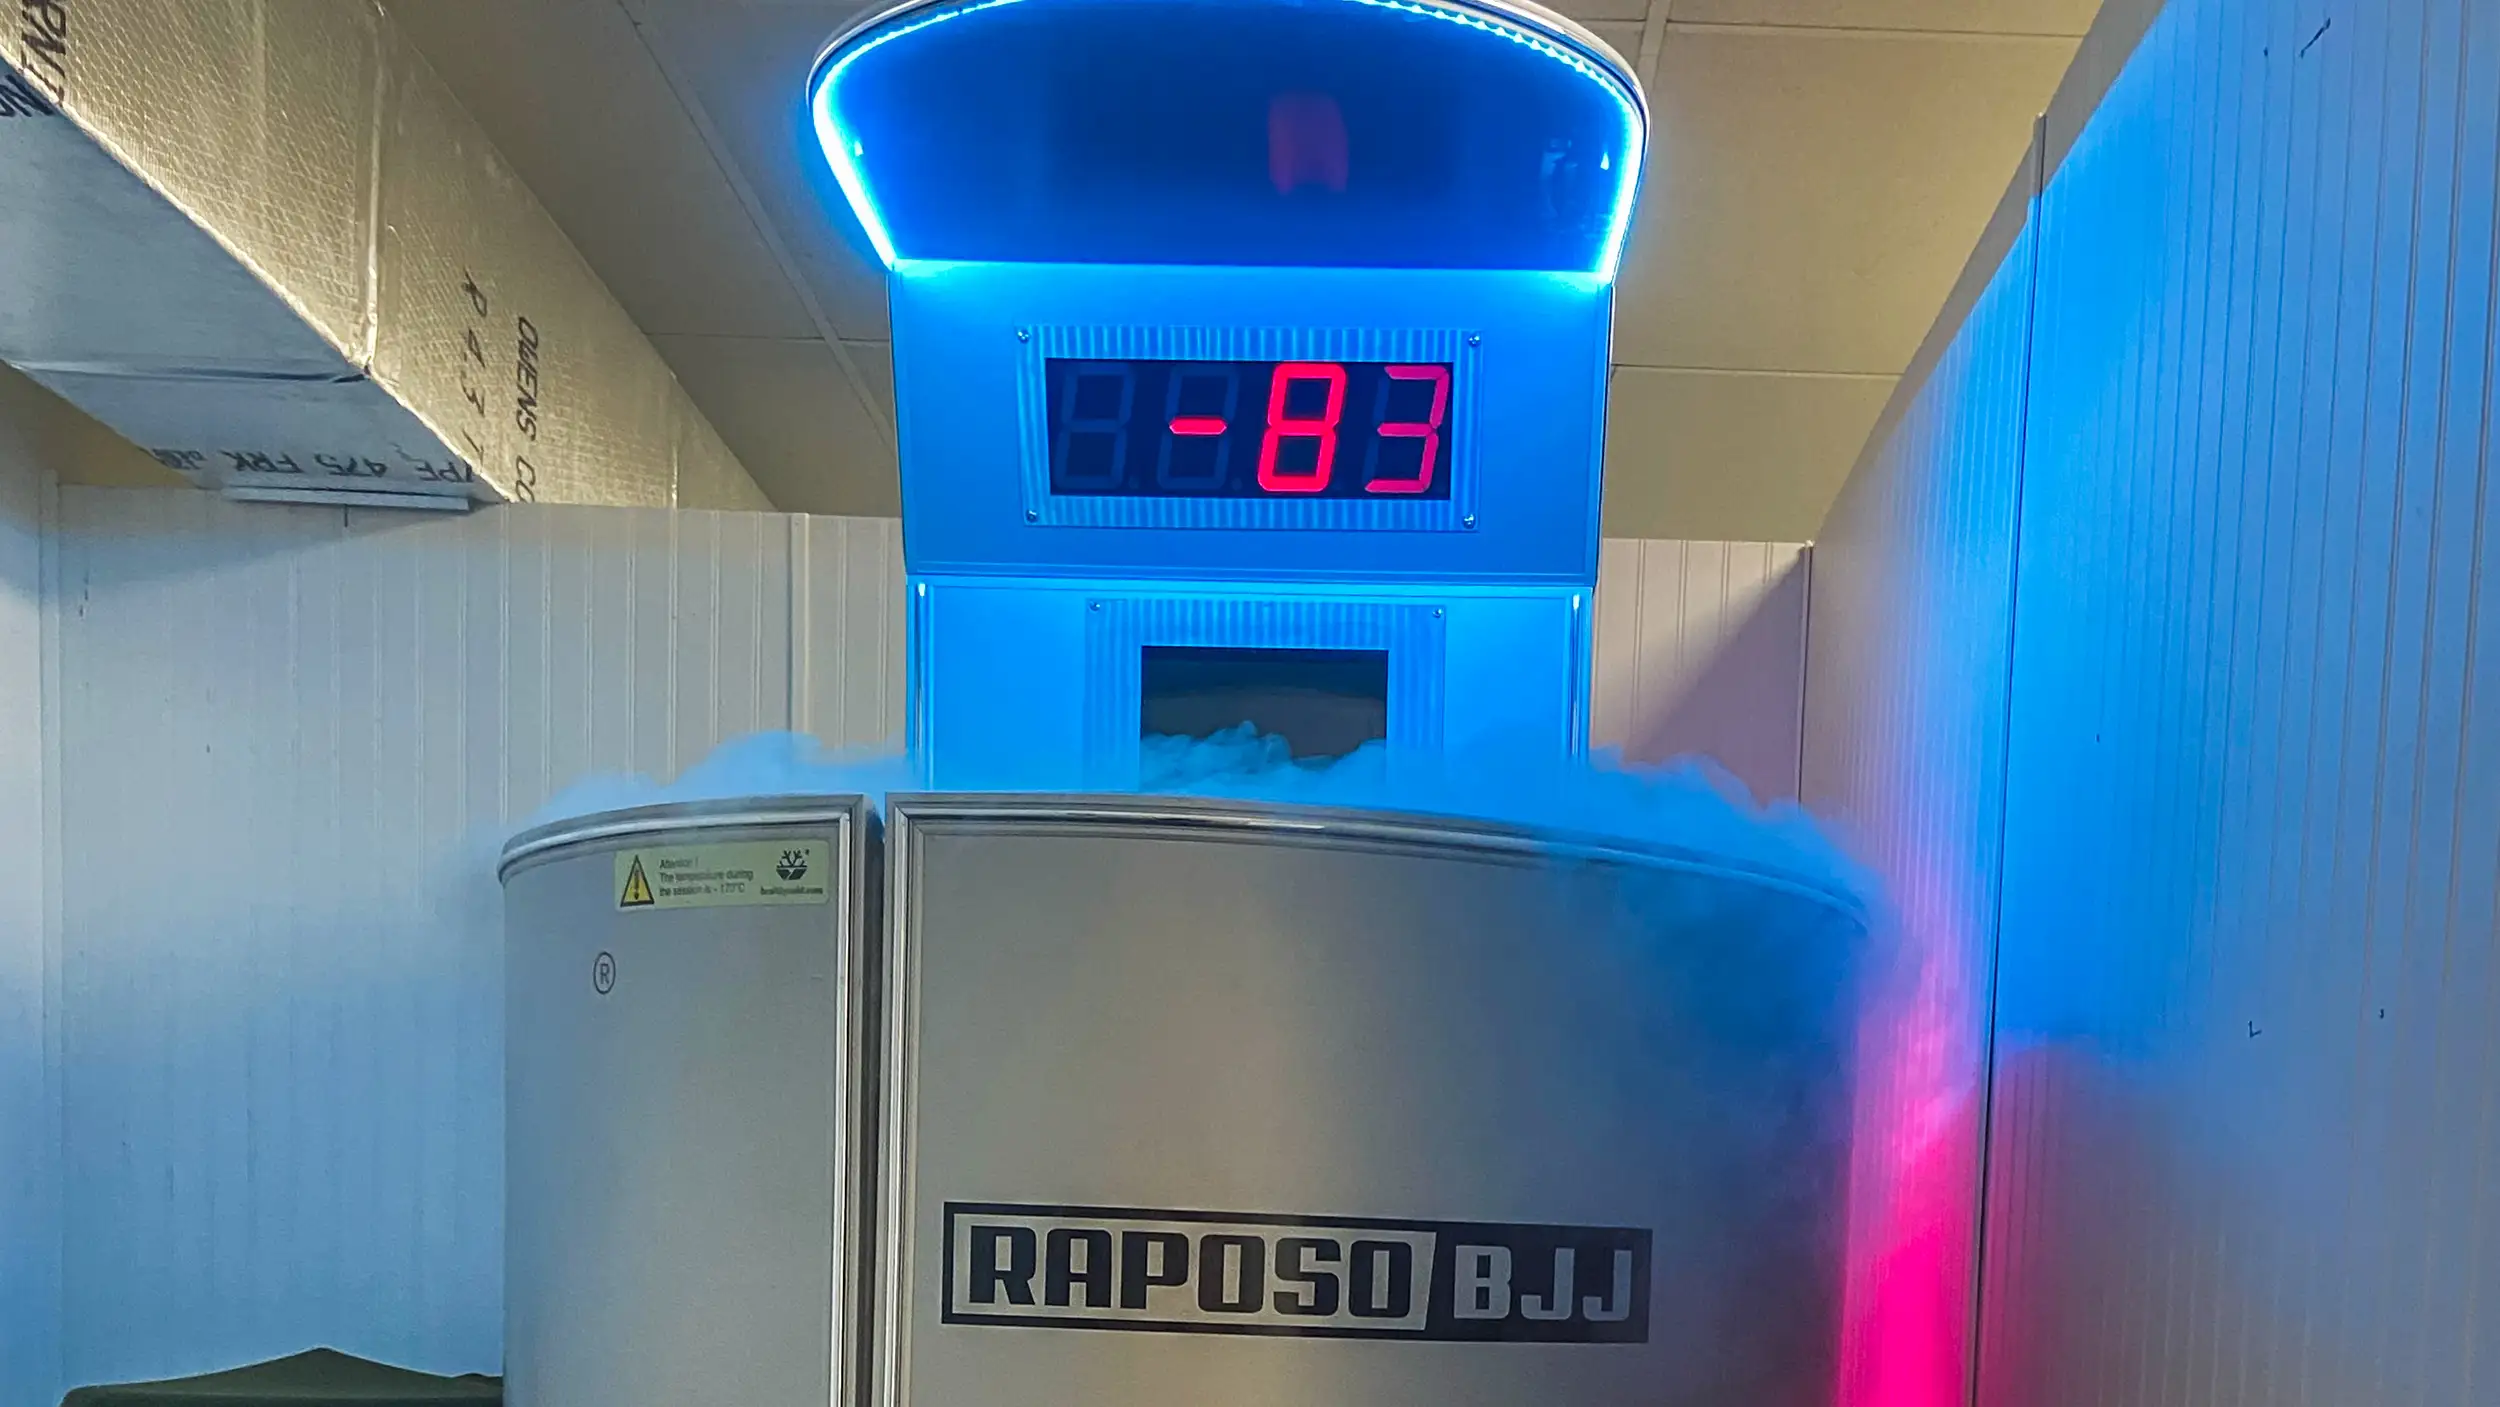 An image of the best cryotherapy machine in Slidell LA inside of the cryotherapy booth at Raposo BJJ Academy